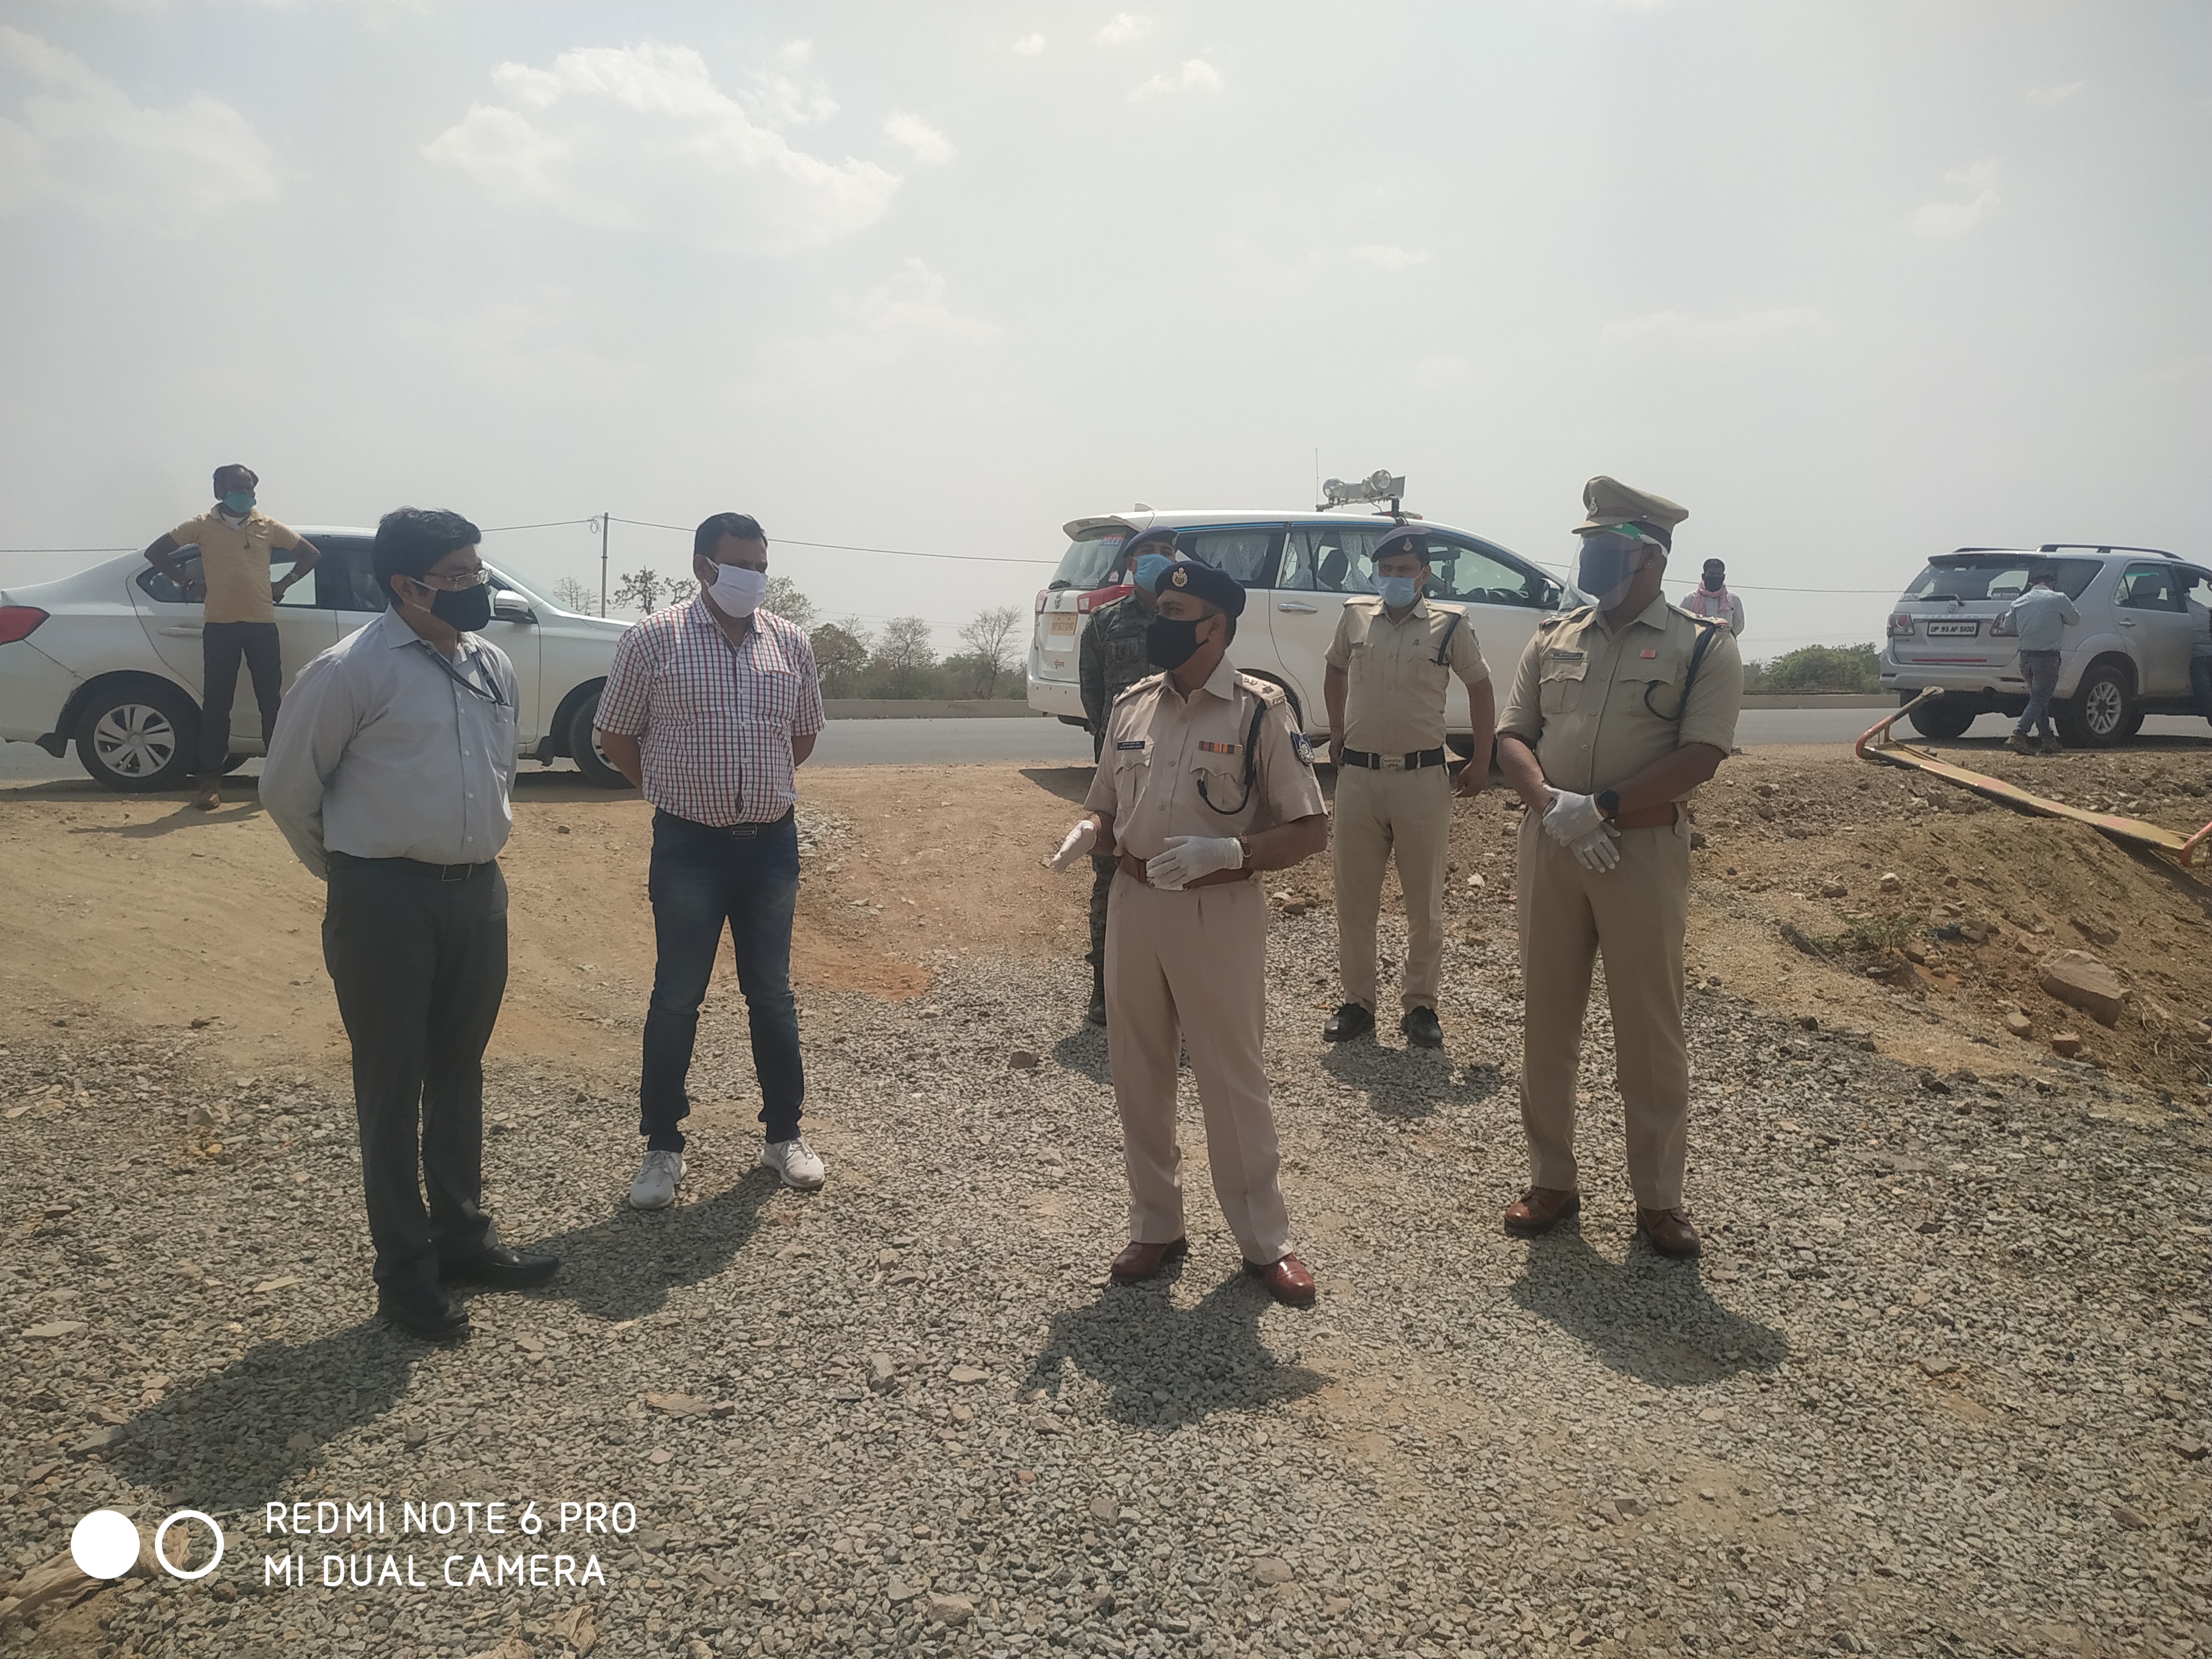 Survey team came to inspect the allotted land